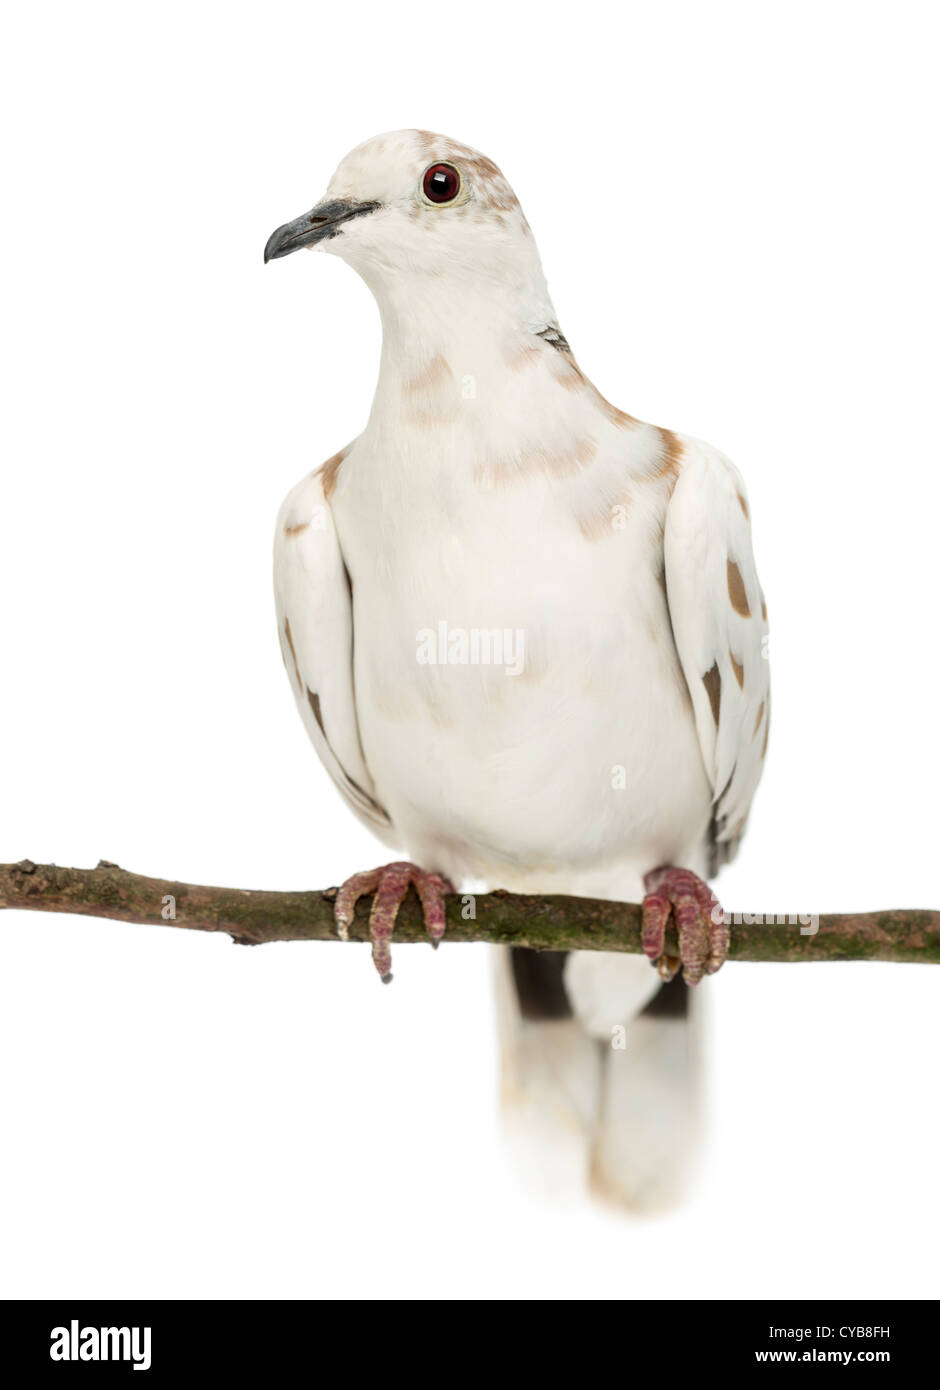 African Collared Dove, Streptopelia roseogrisea, perched on a branch against white background Stock Photo